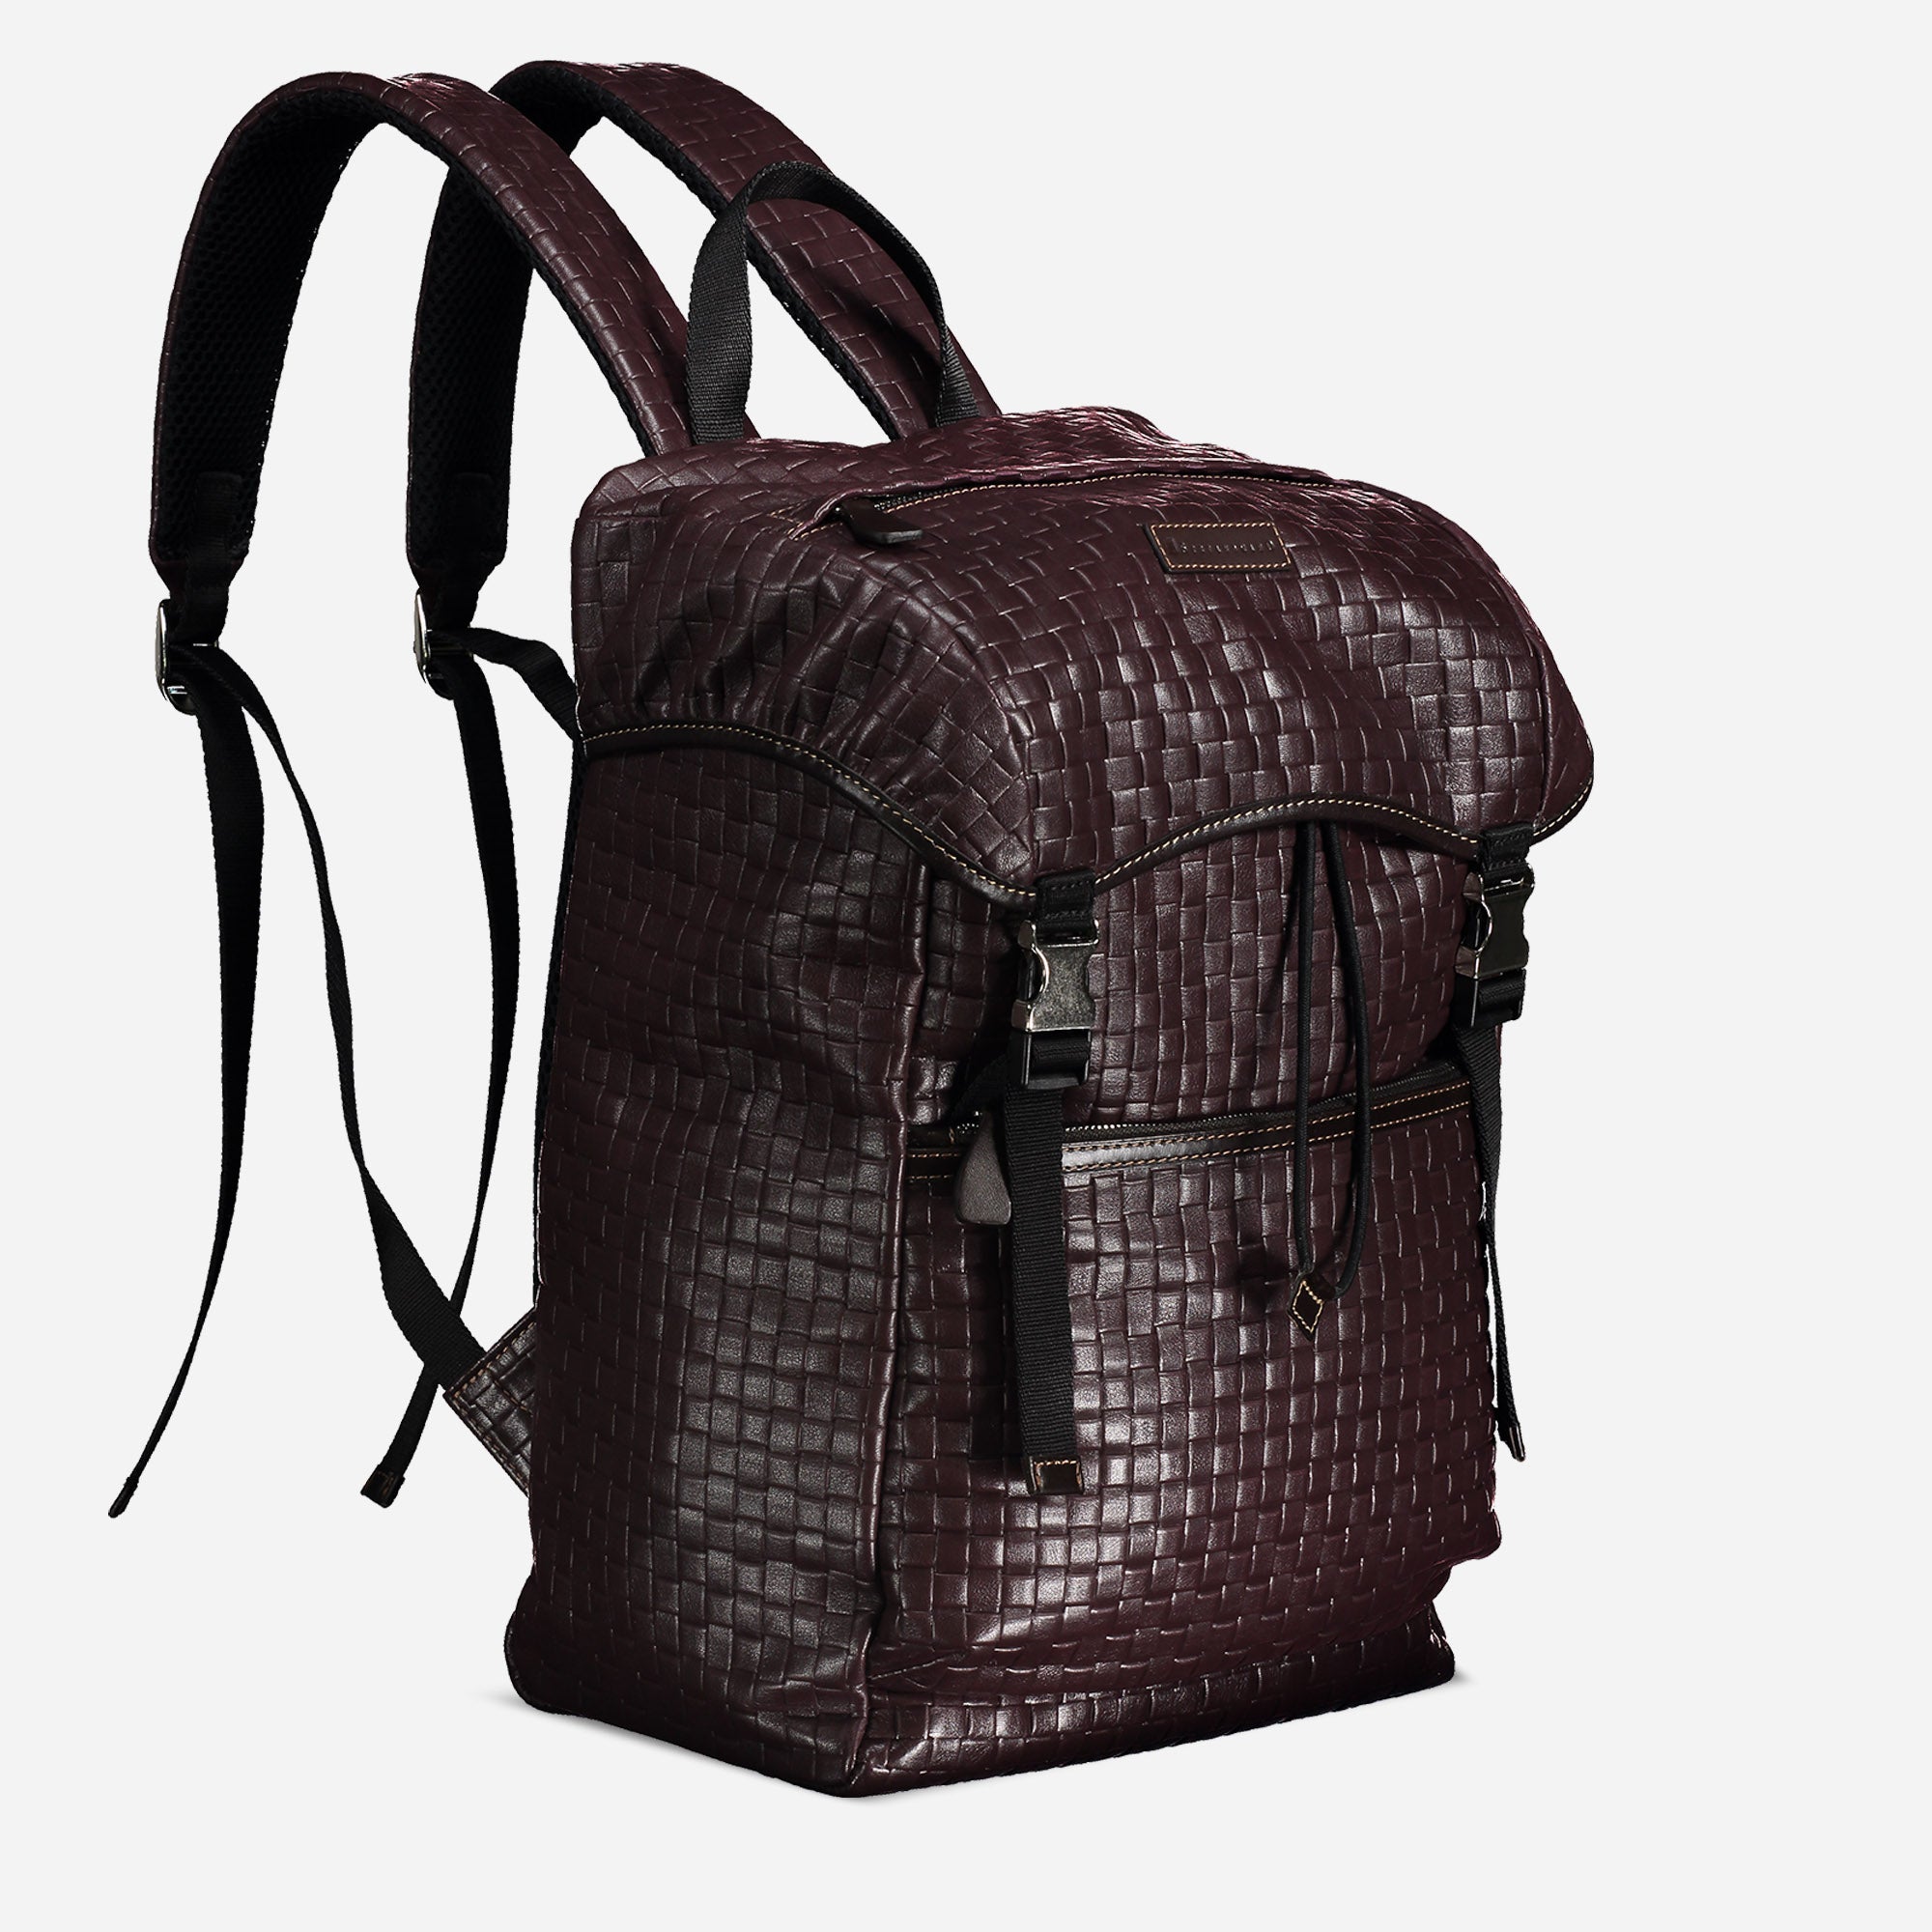 26714 - BACKPACK<br> Woven calfskin leather